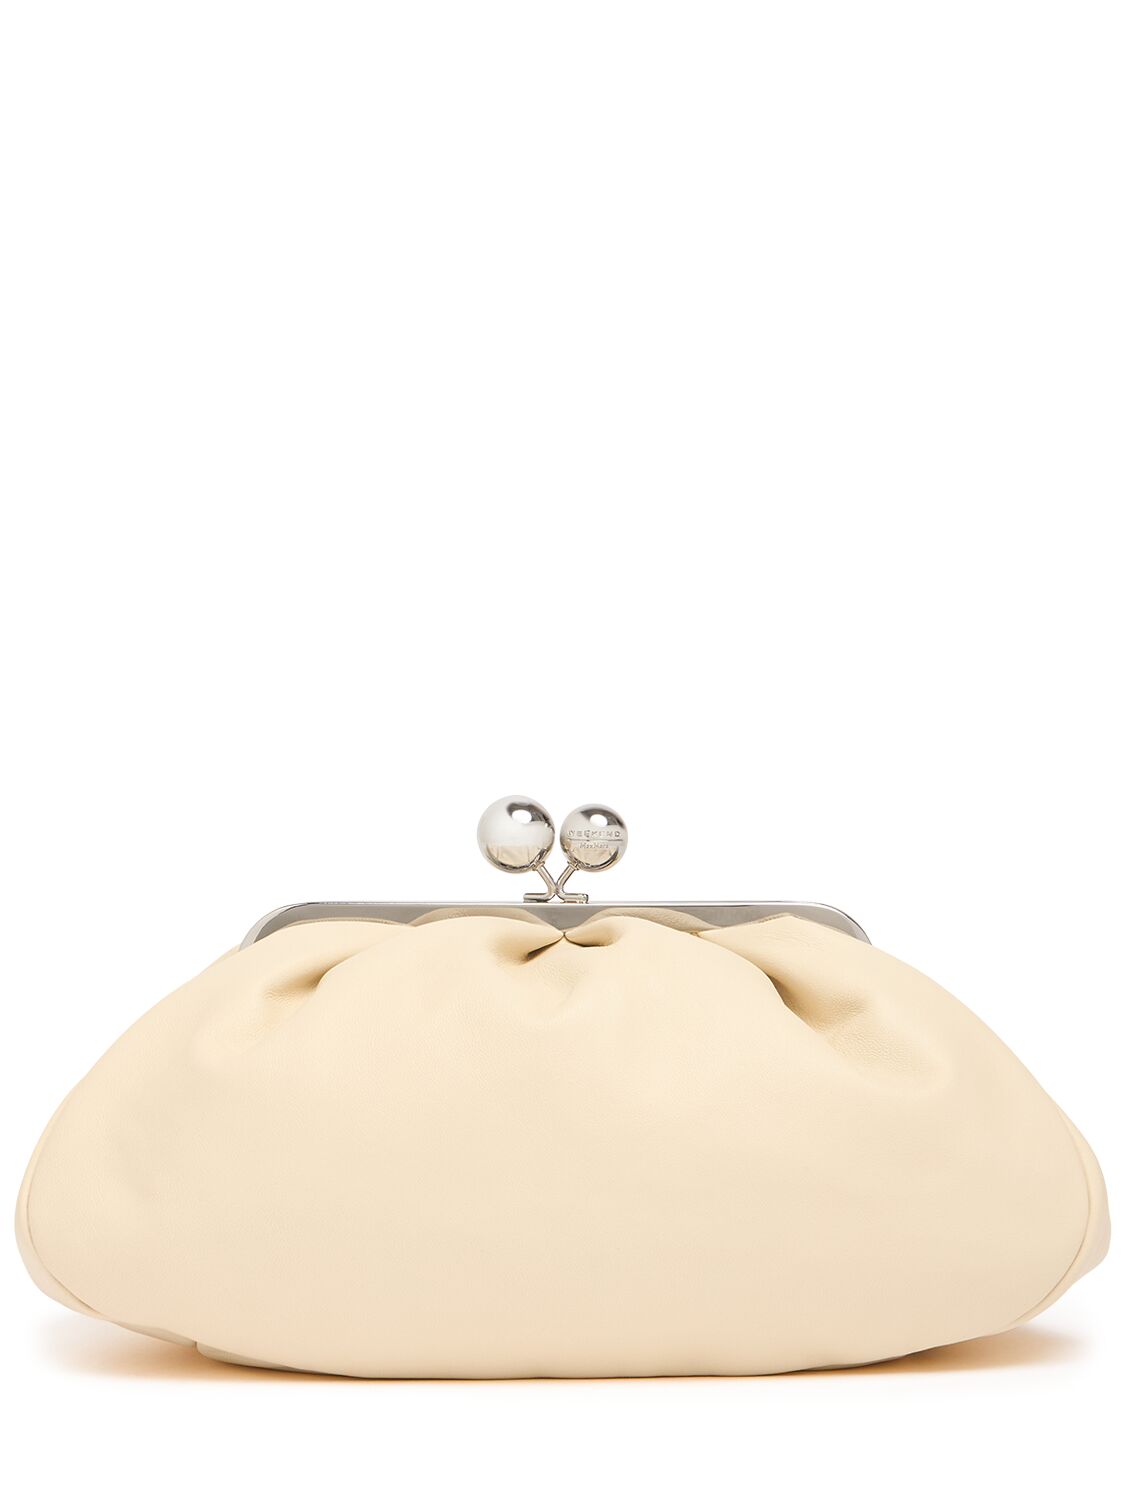 Weekend Max Mara Cubico Leather Clutch In Ivory